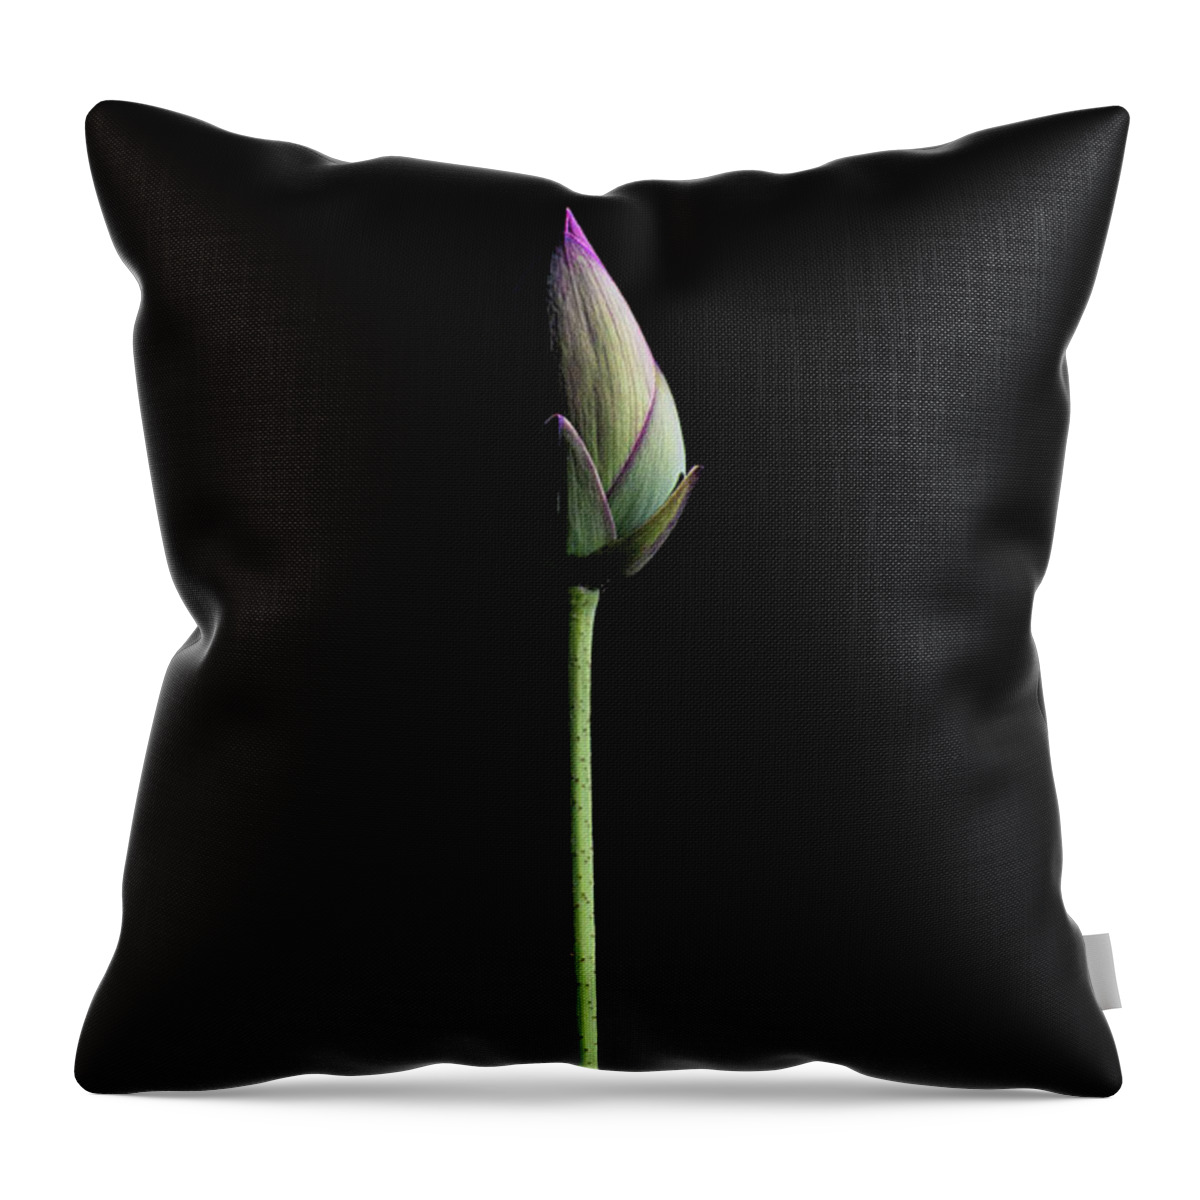 Lotus Throw Pillow featuring the photograph Lotus Bud by Gary Geddes